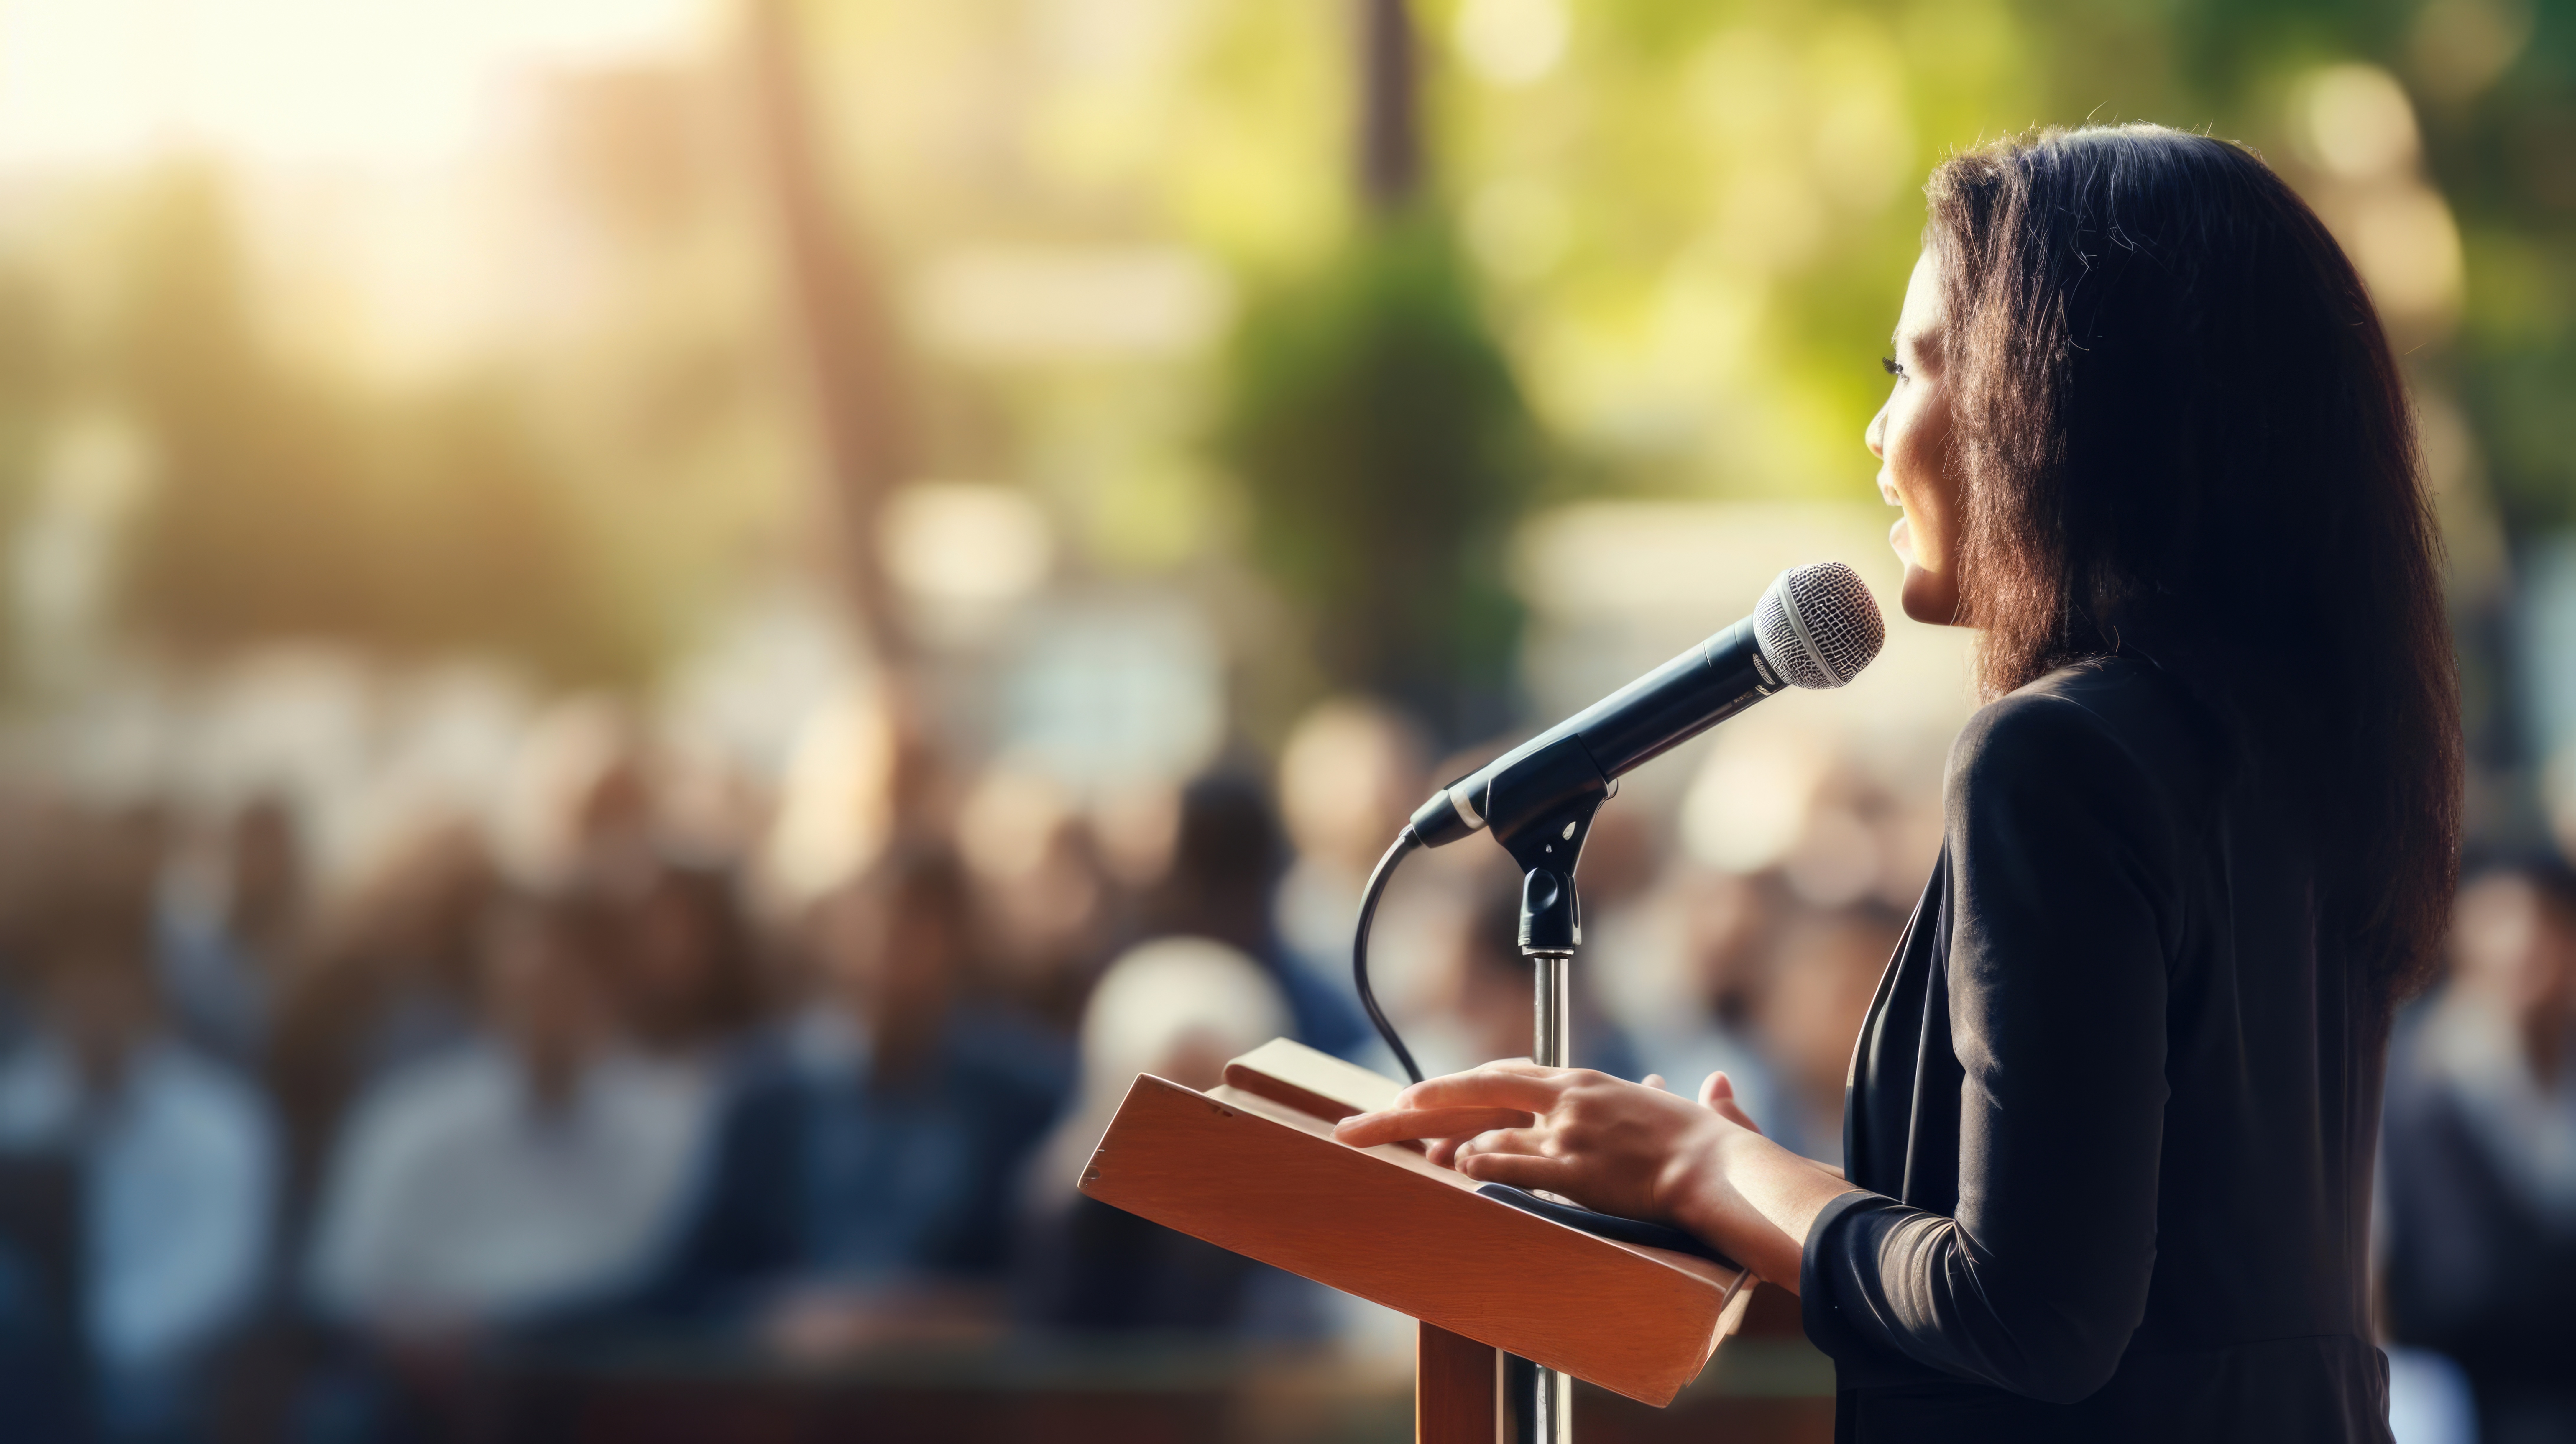 A speaker leader woman standing make a speech with a microphone in front of audiences on stage outside in public